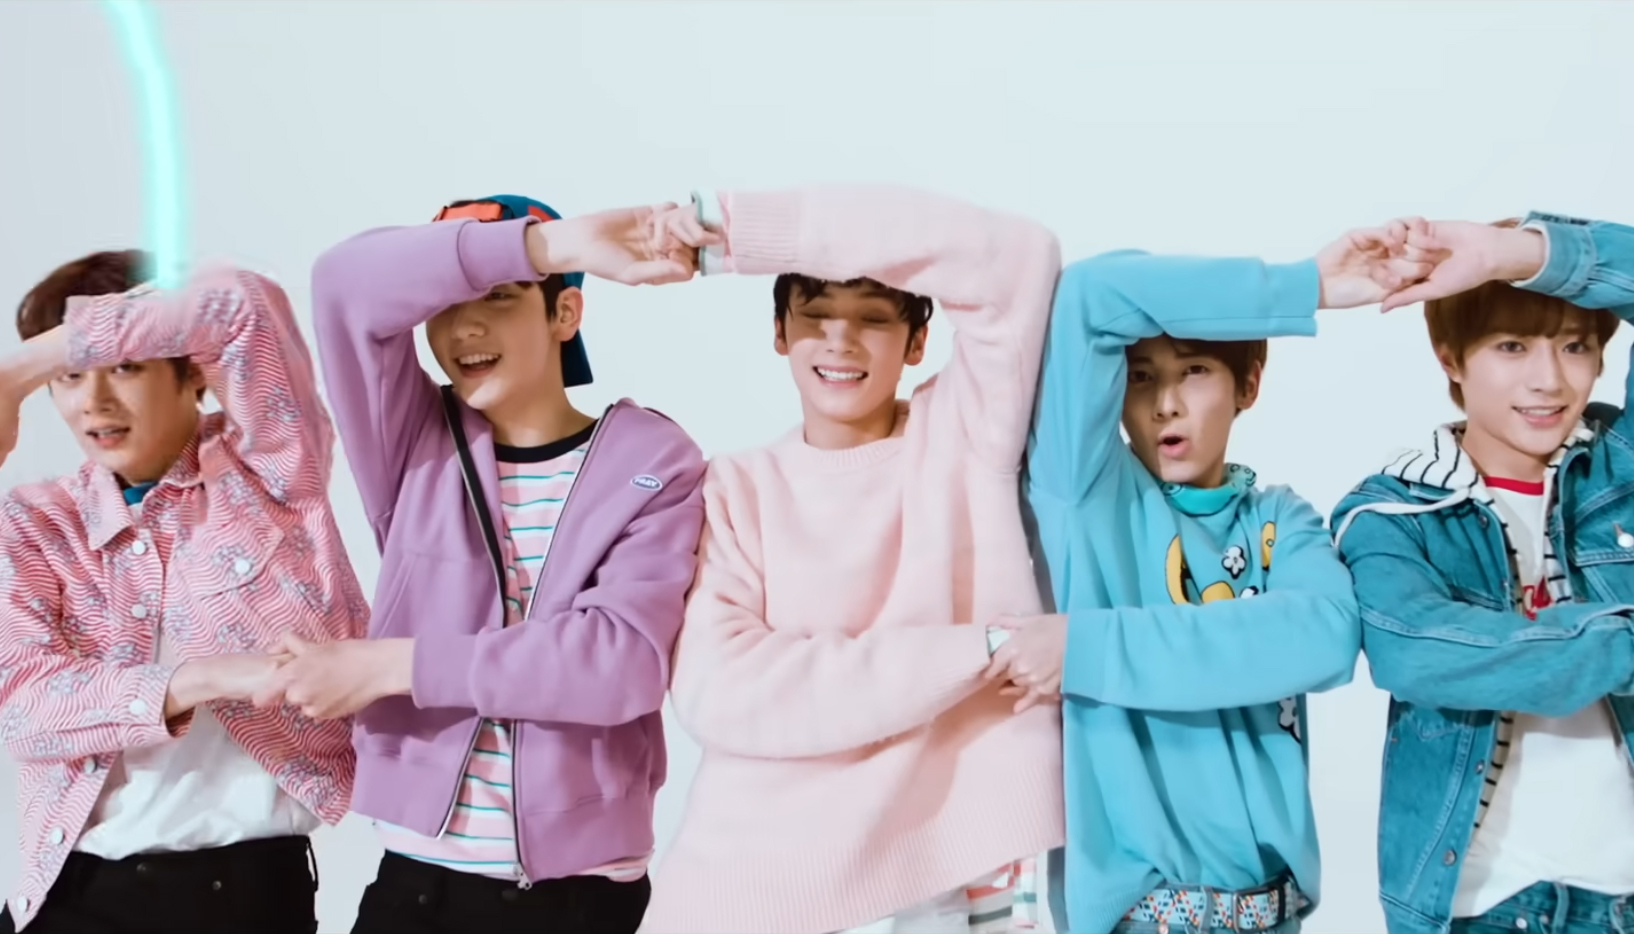 When Did TXT Debut?